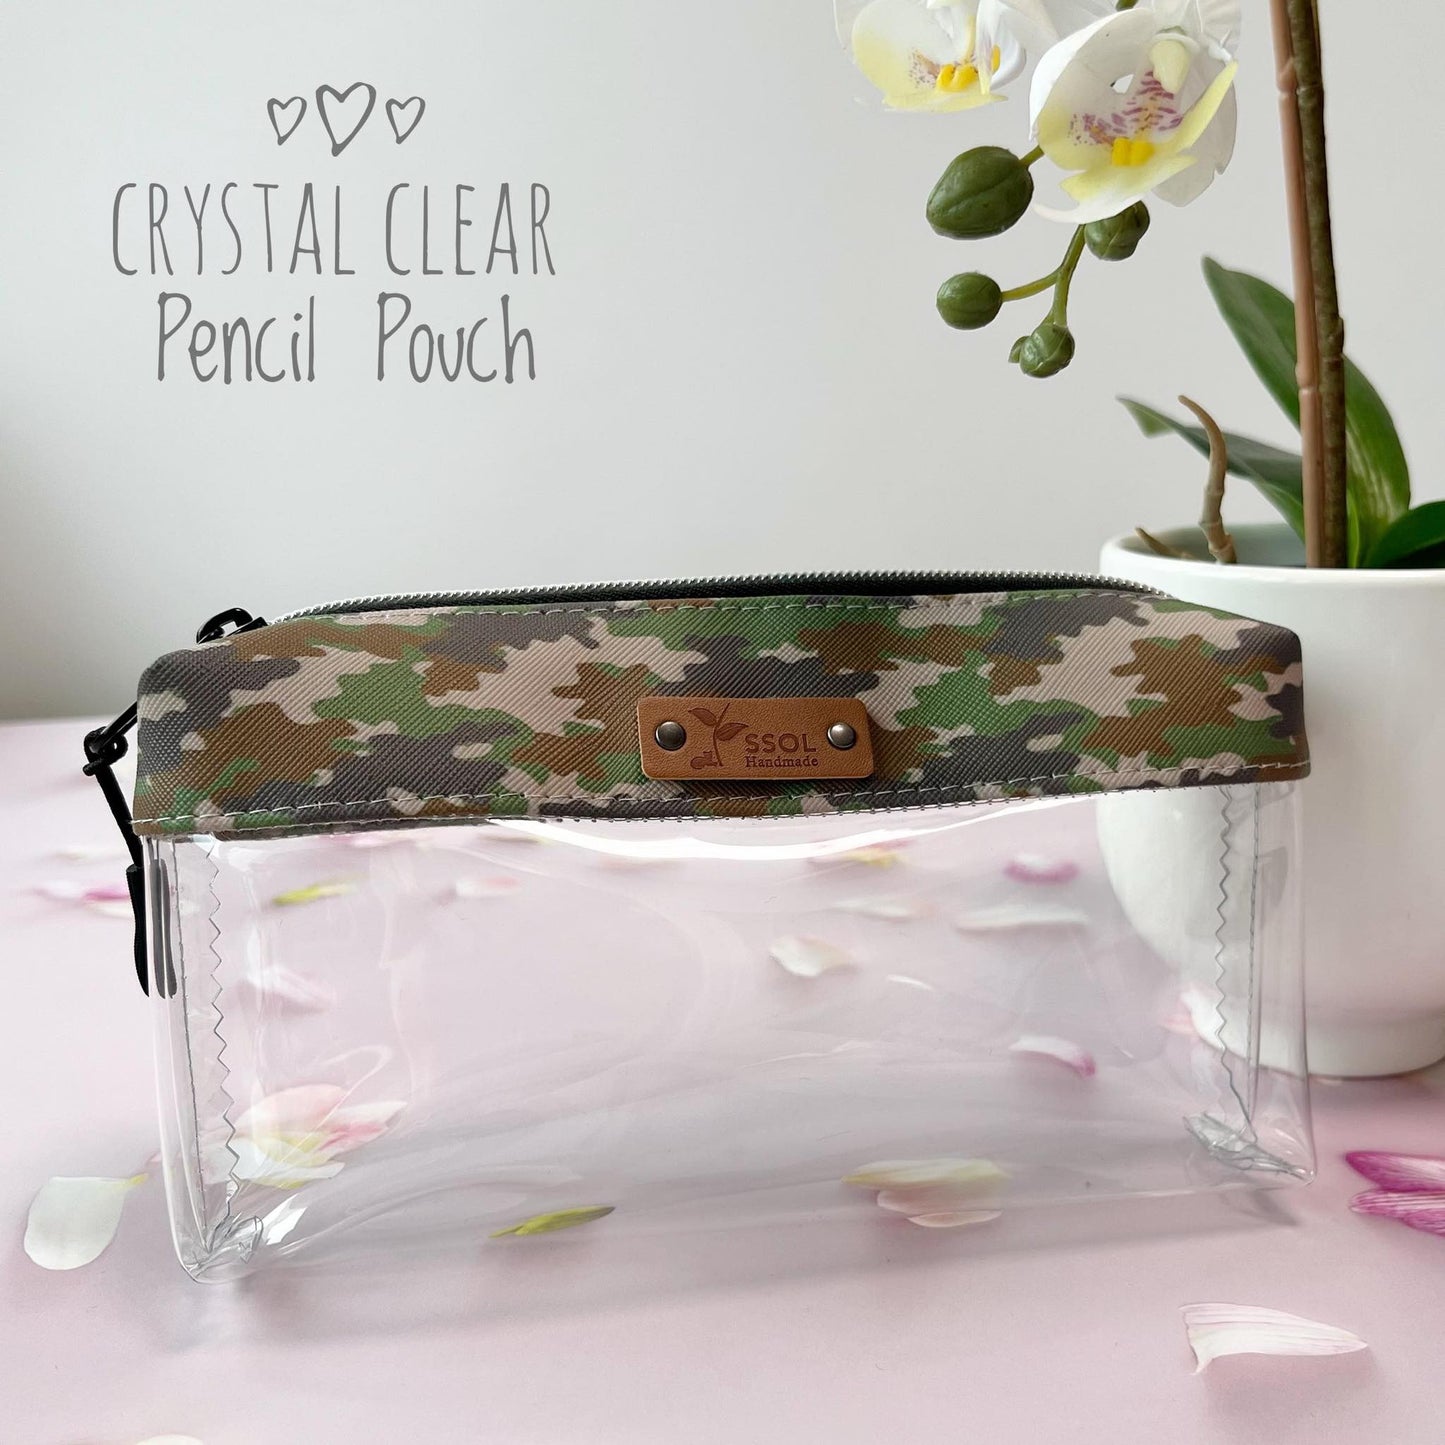 Crystal Clear Pencil Pouch - CCPP12